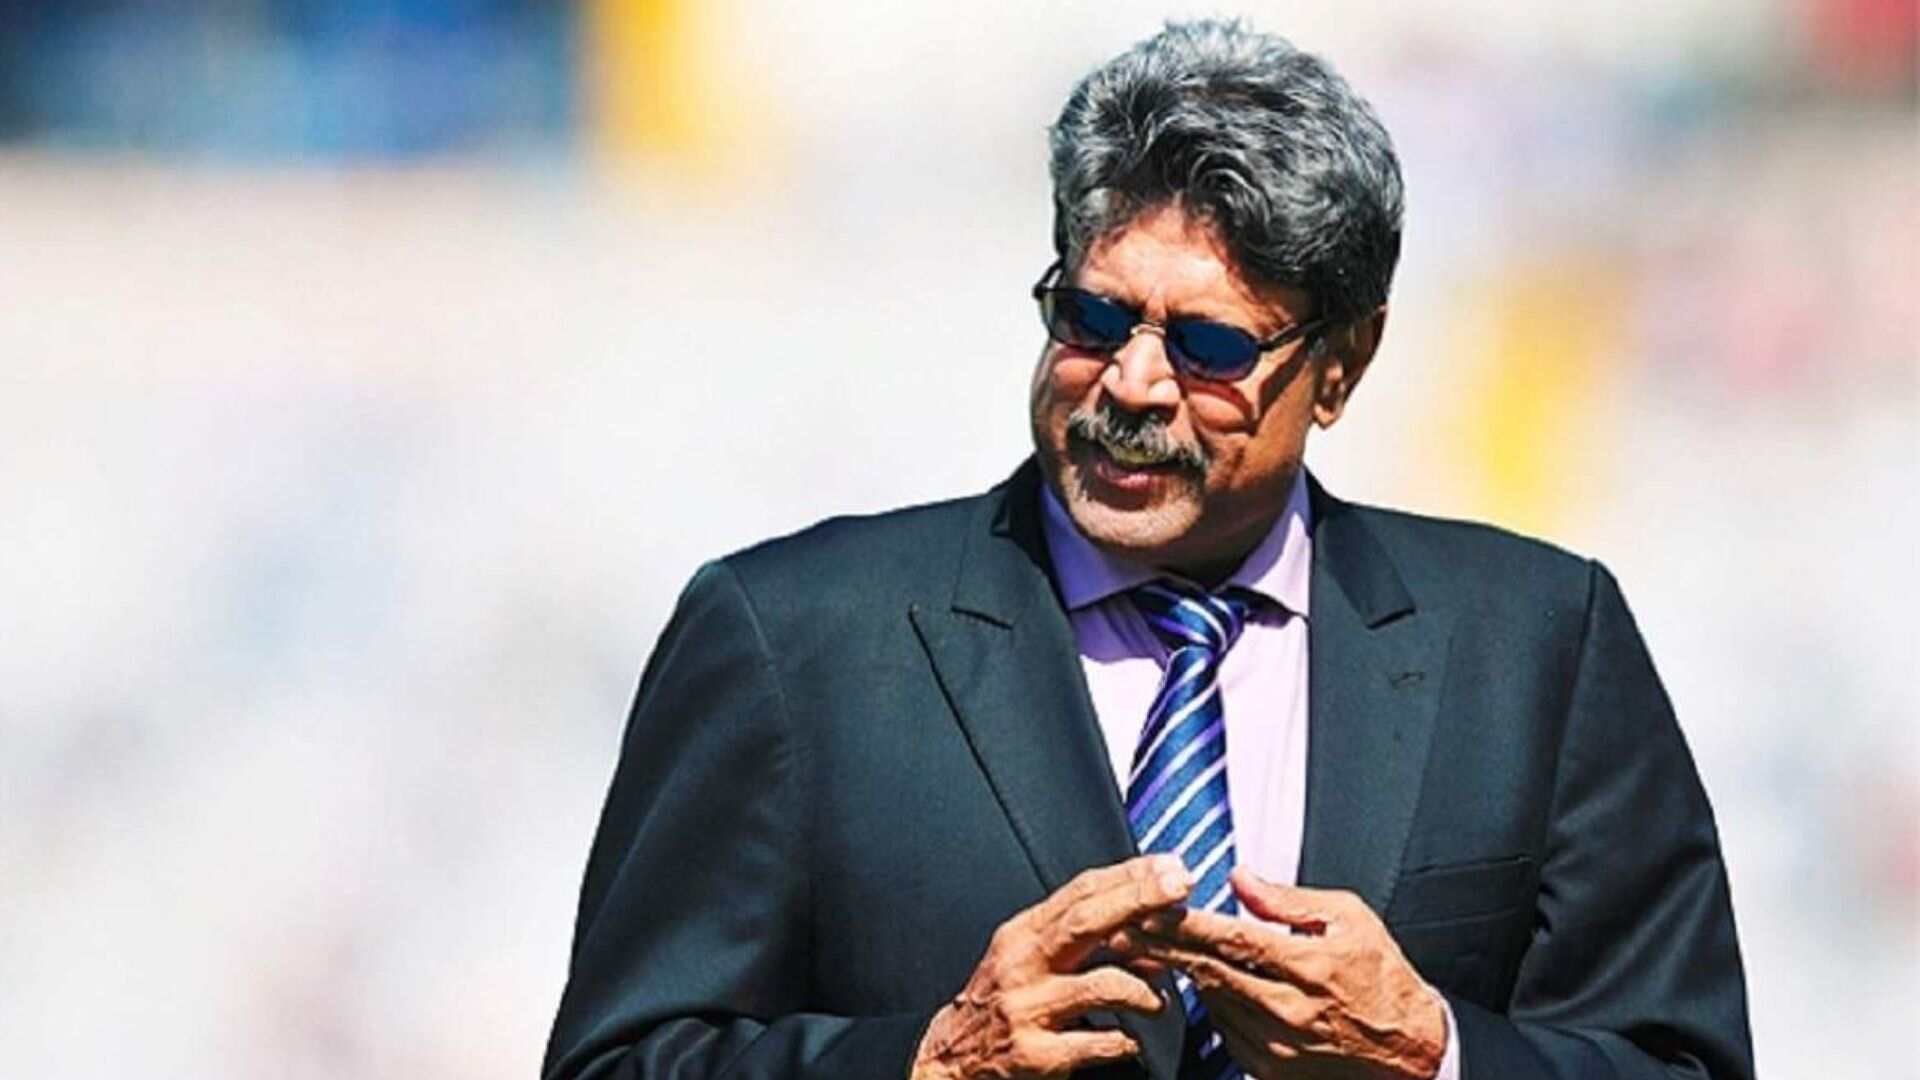 “Important Thing Is To Pick The Right People”: Kapil Dev After Casting Vote